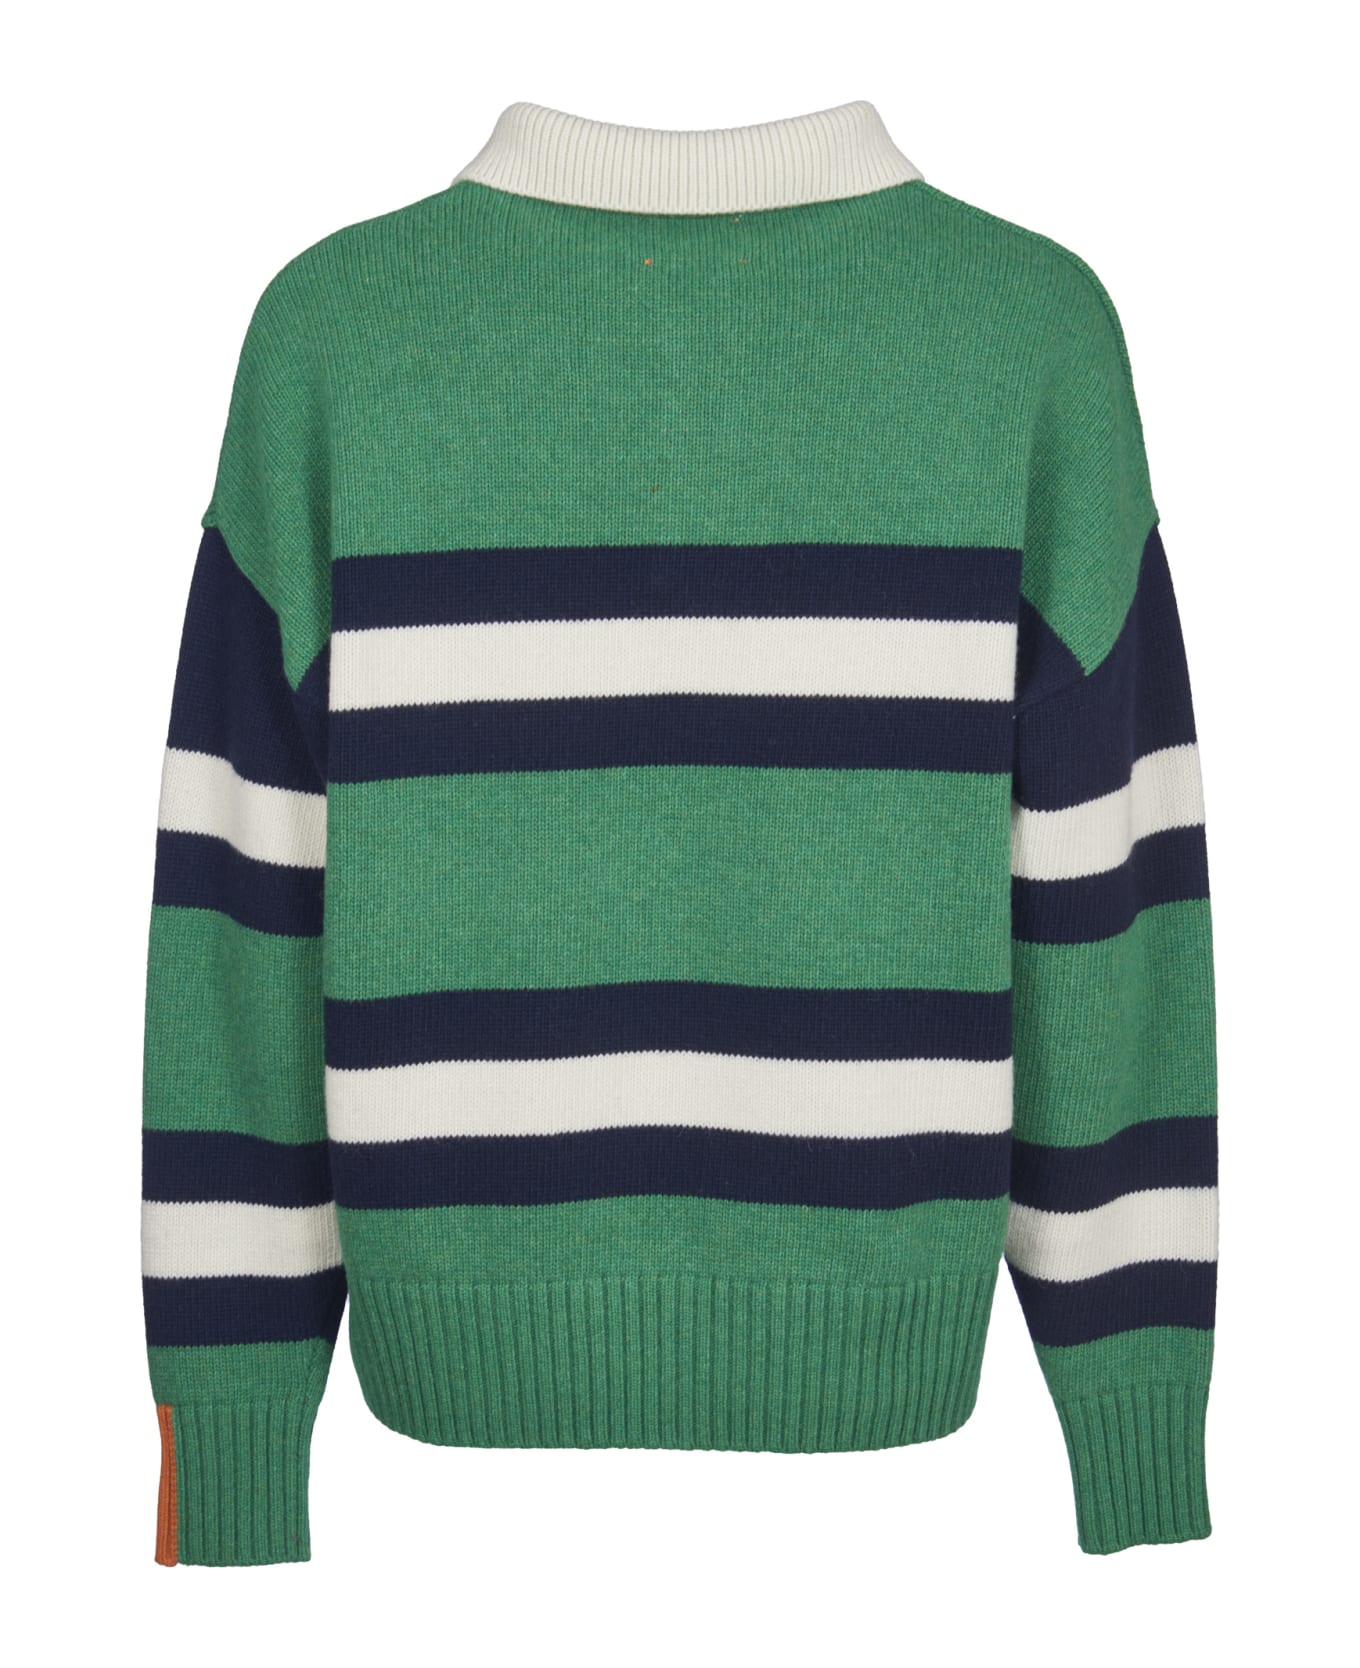 Right For Green Polo Striped Sweater - Verde